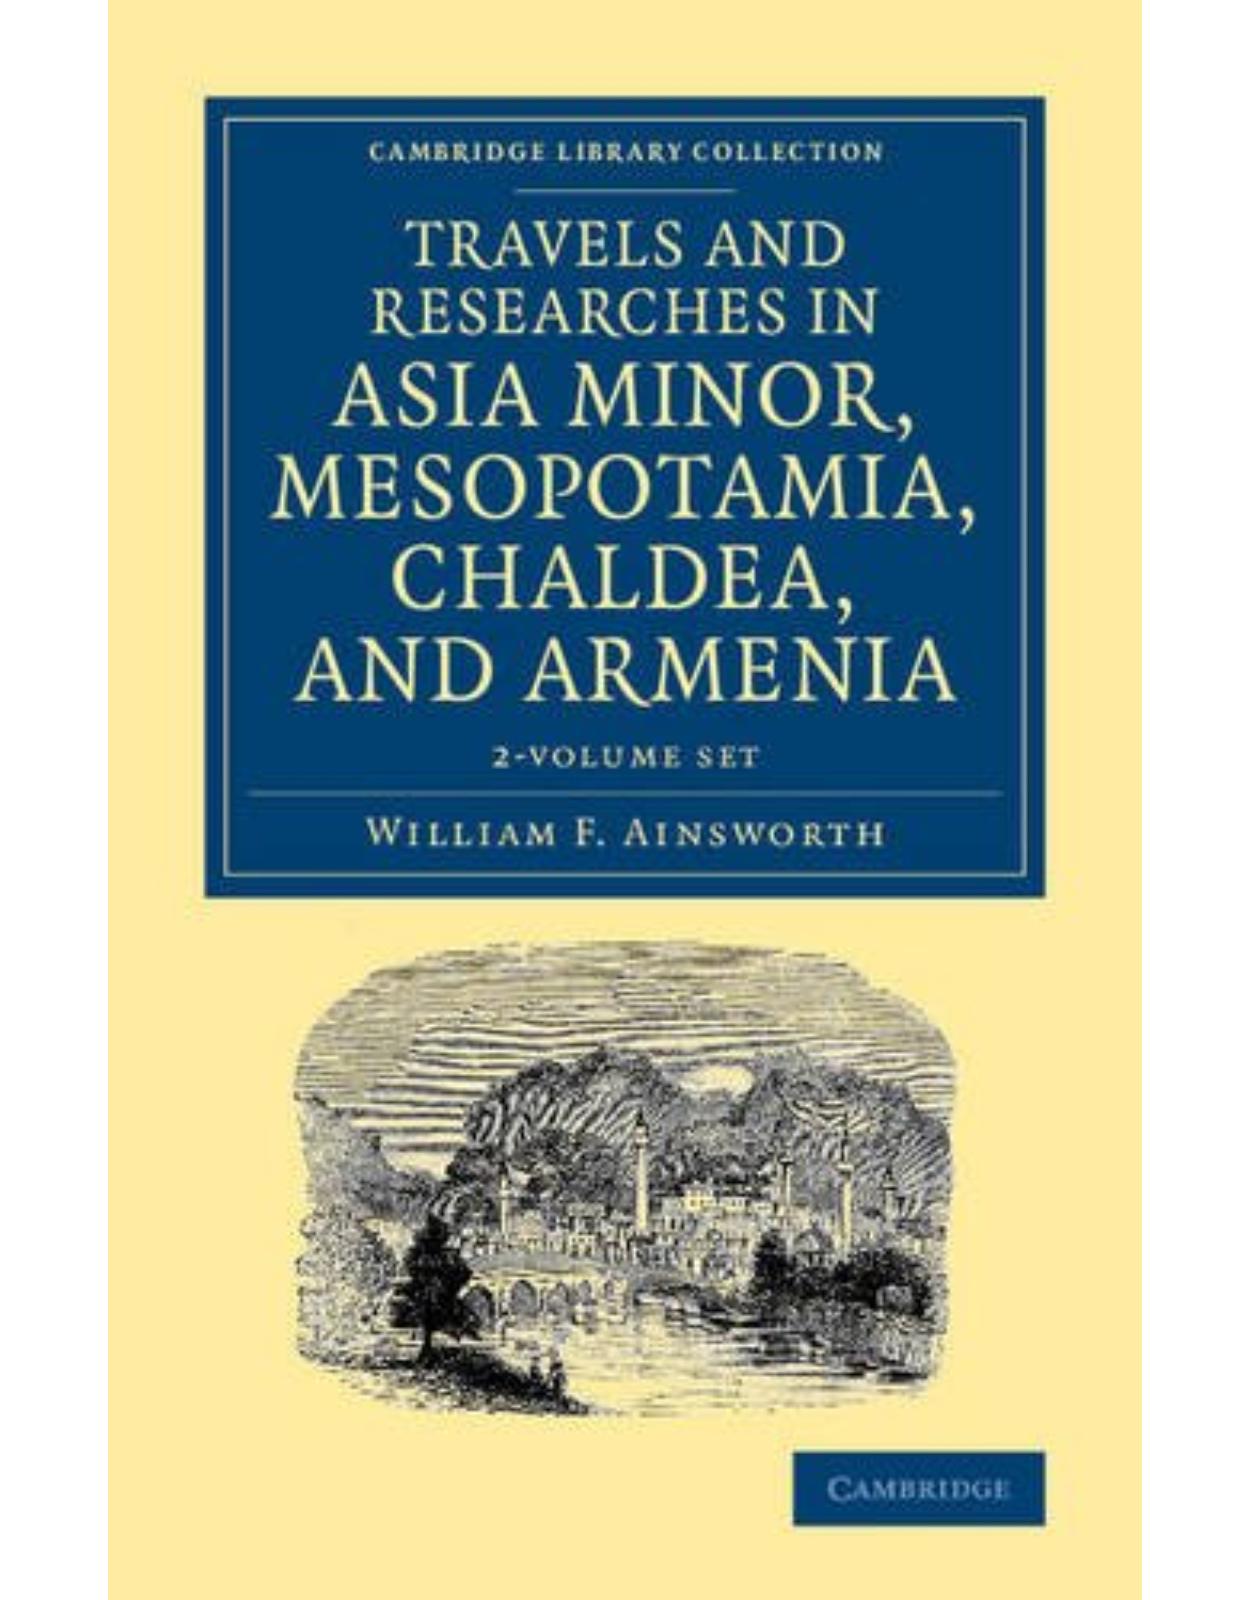 Travels and Researches in Asia Minor, Mesopotamia, Chaldea, and Armenia 2 Volume Set: 1-2 (Cambridge Library Collection - Archaeology)